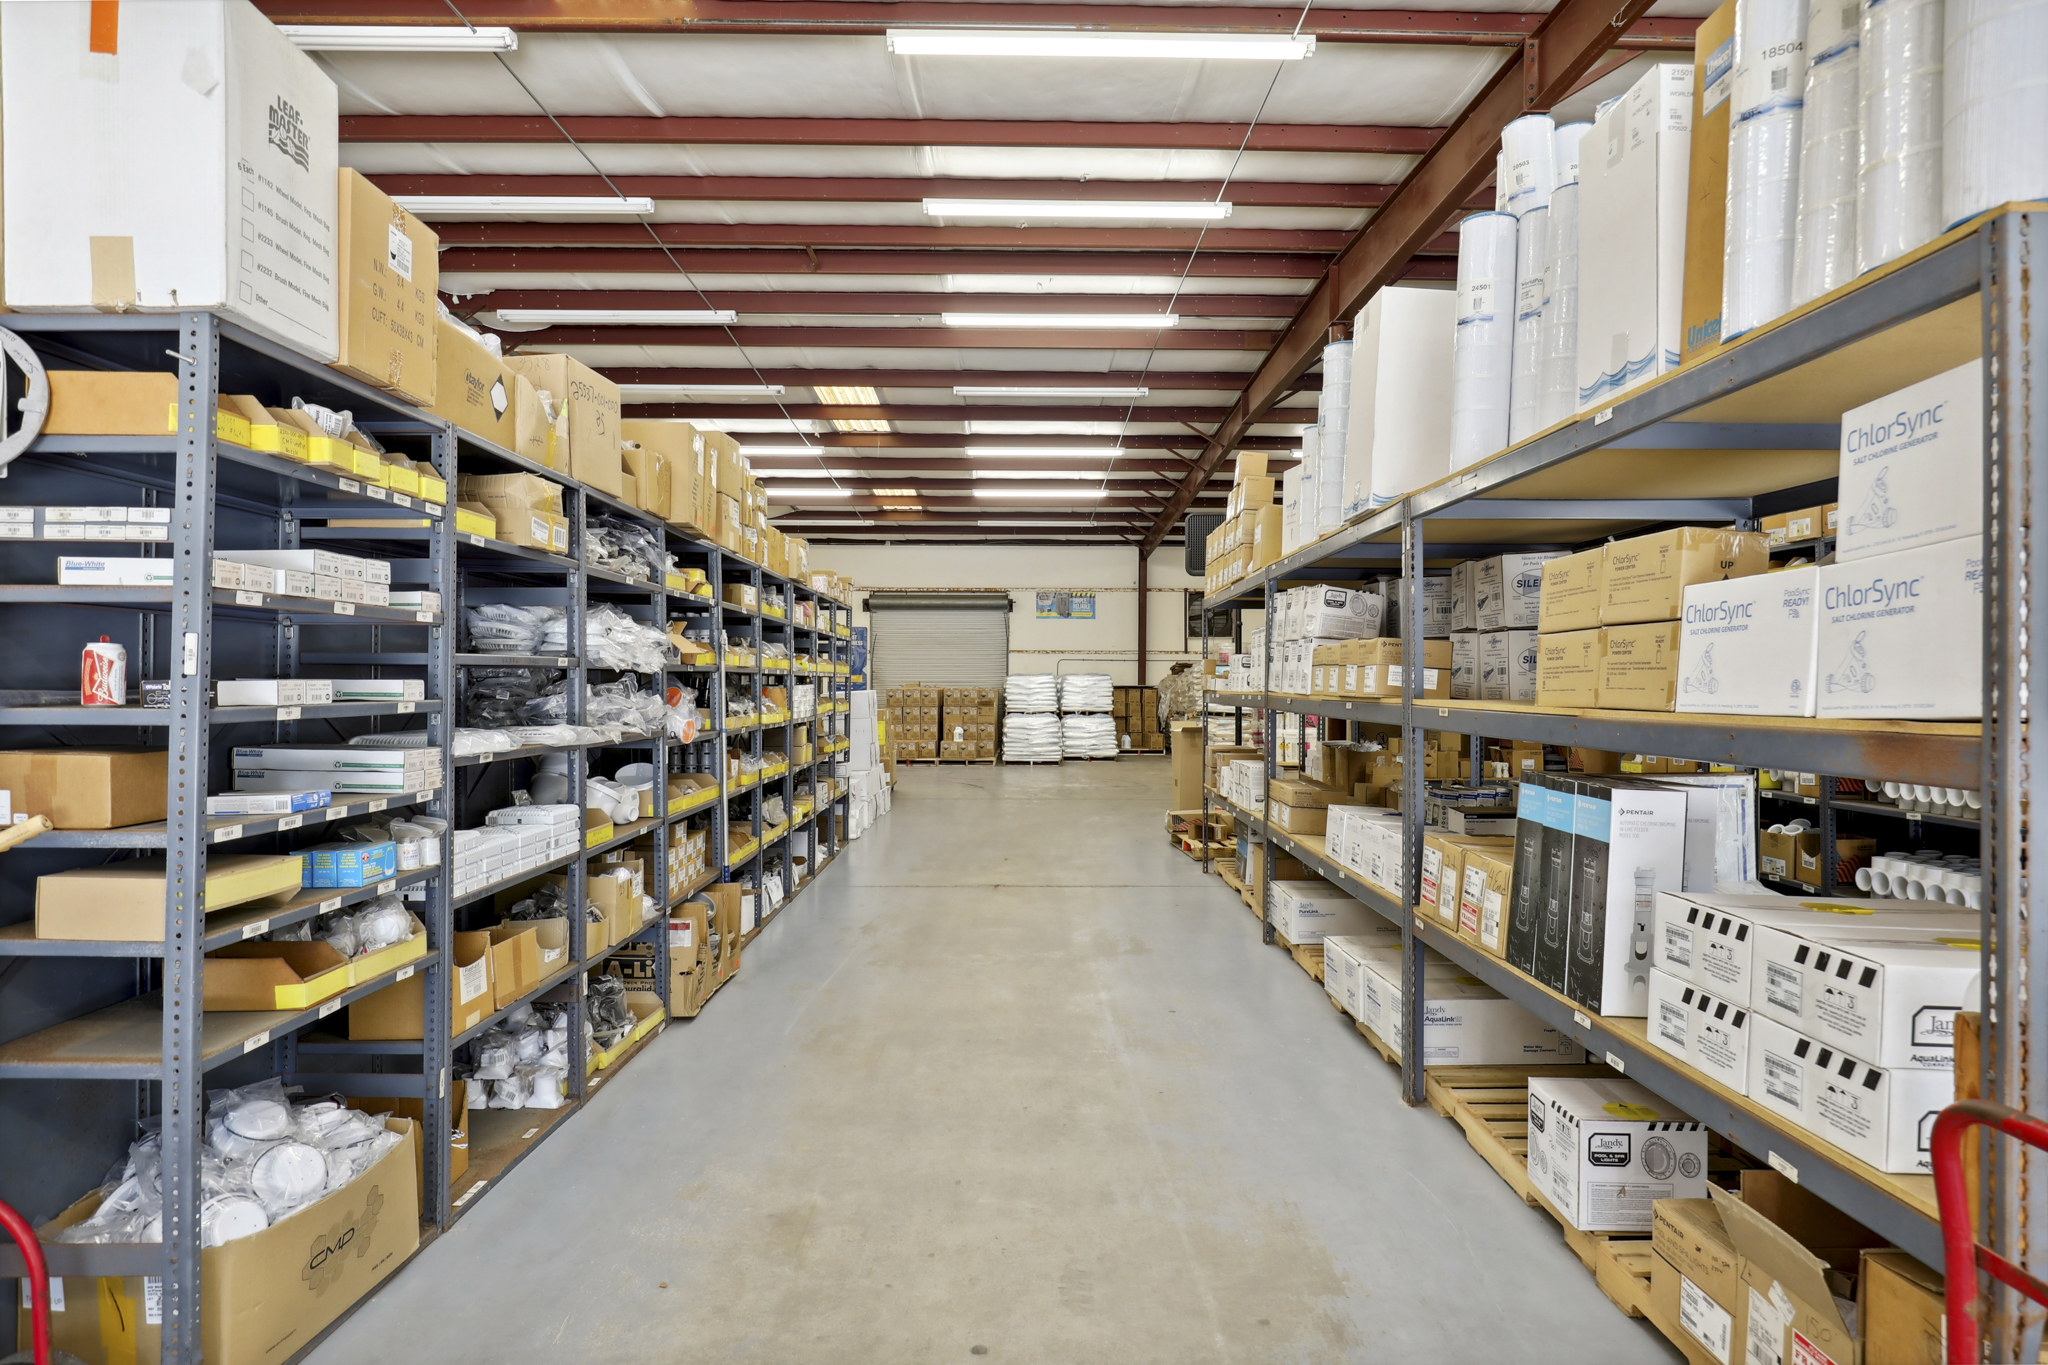 A warehouse or pool store with large shelving units full of pool supply products.